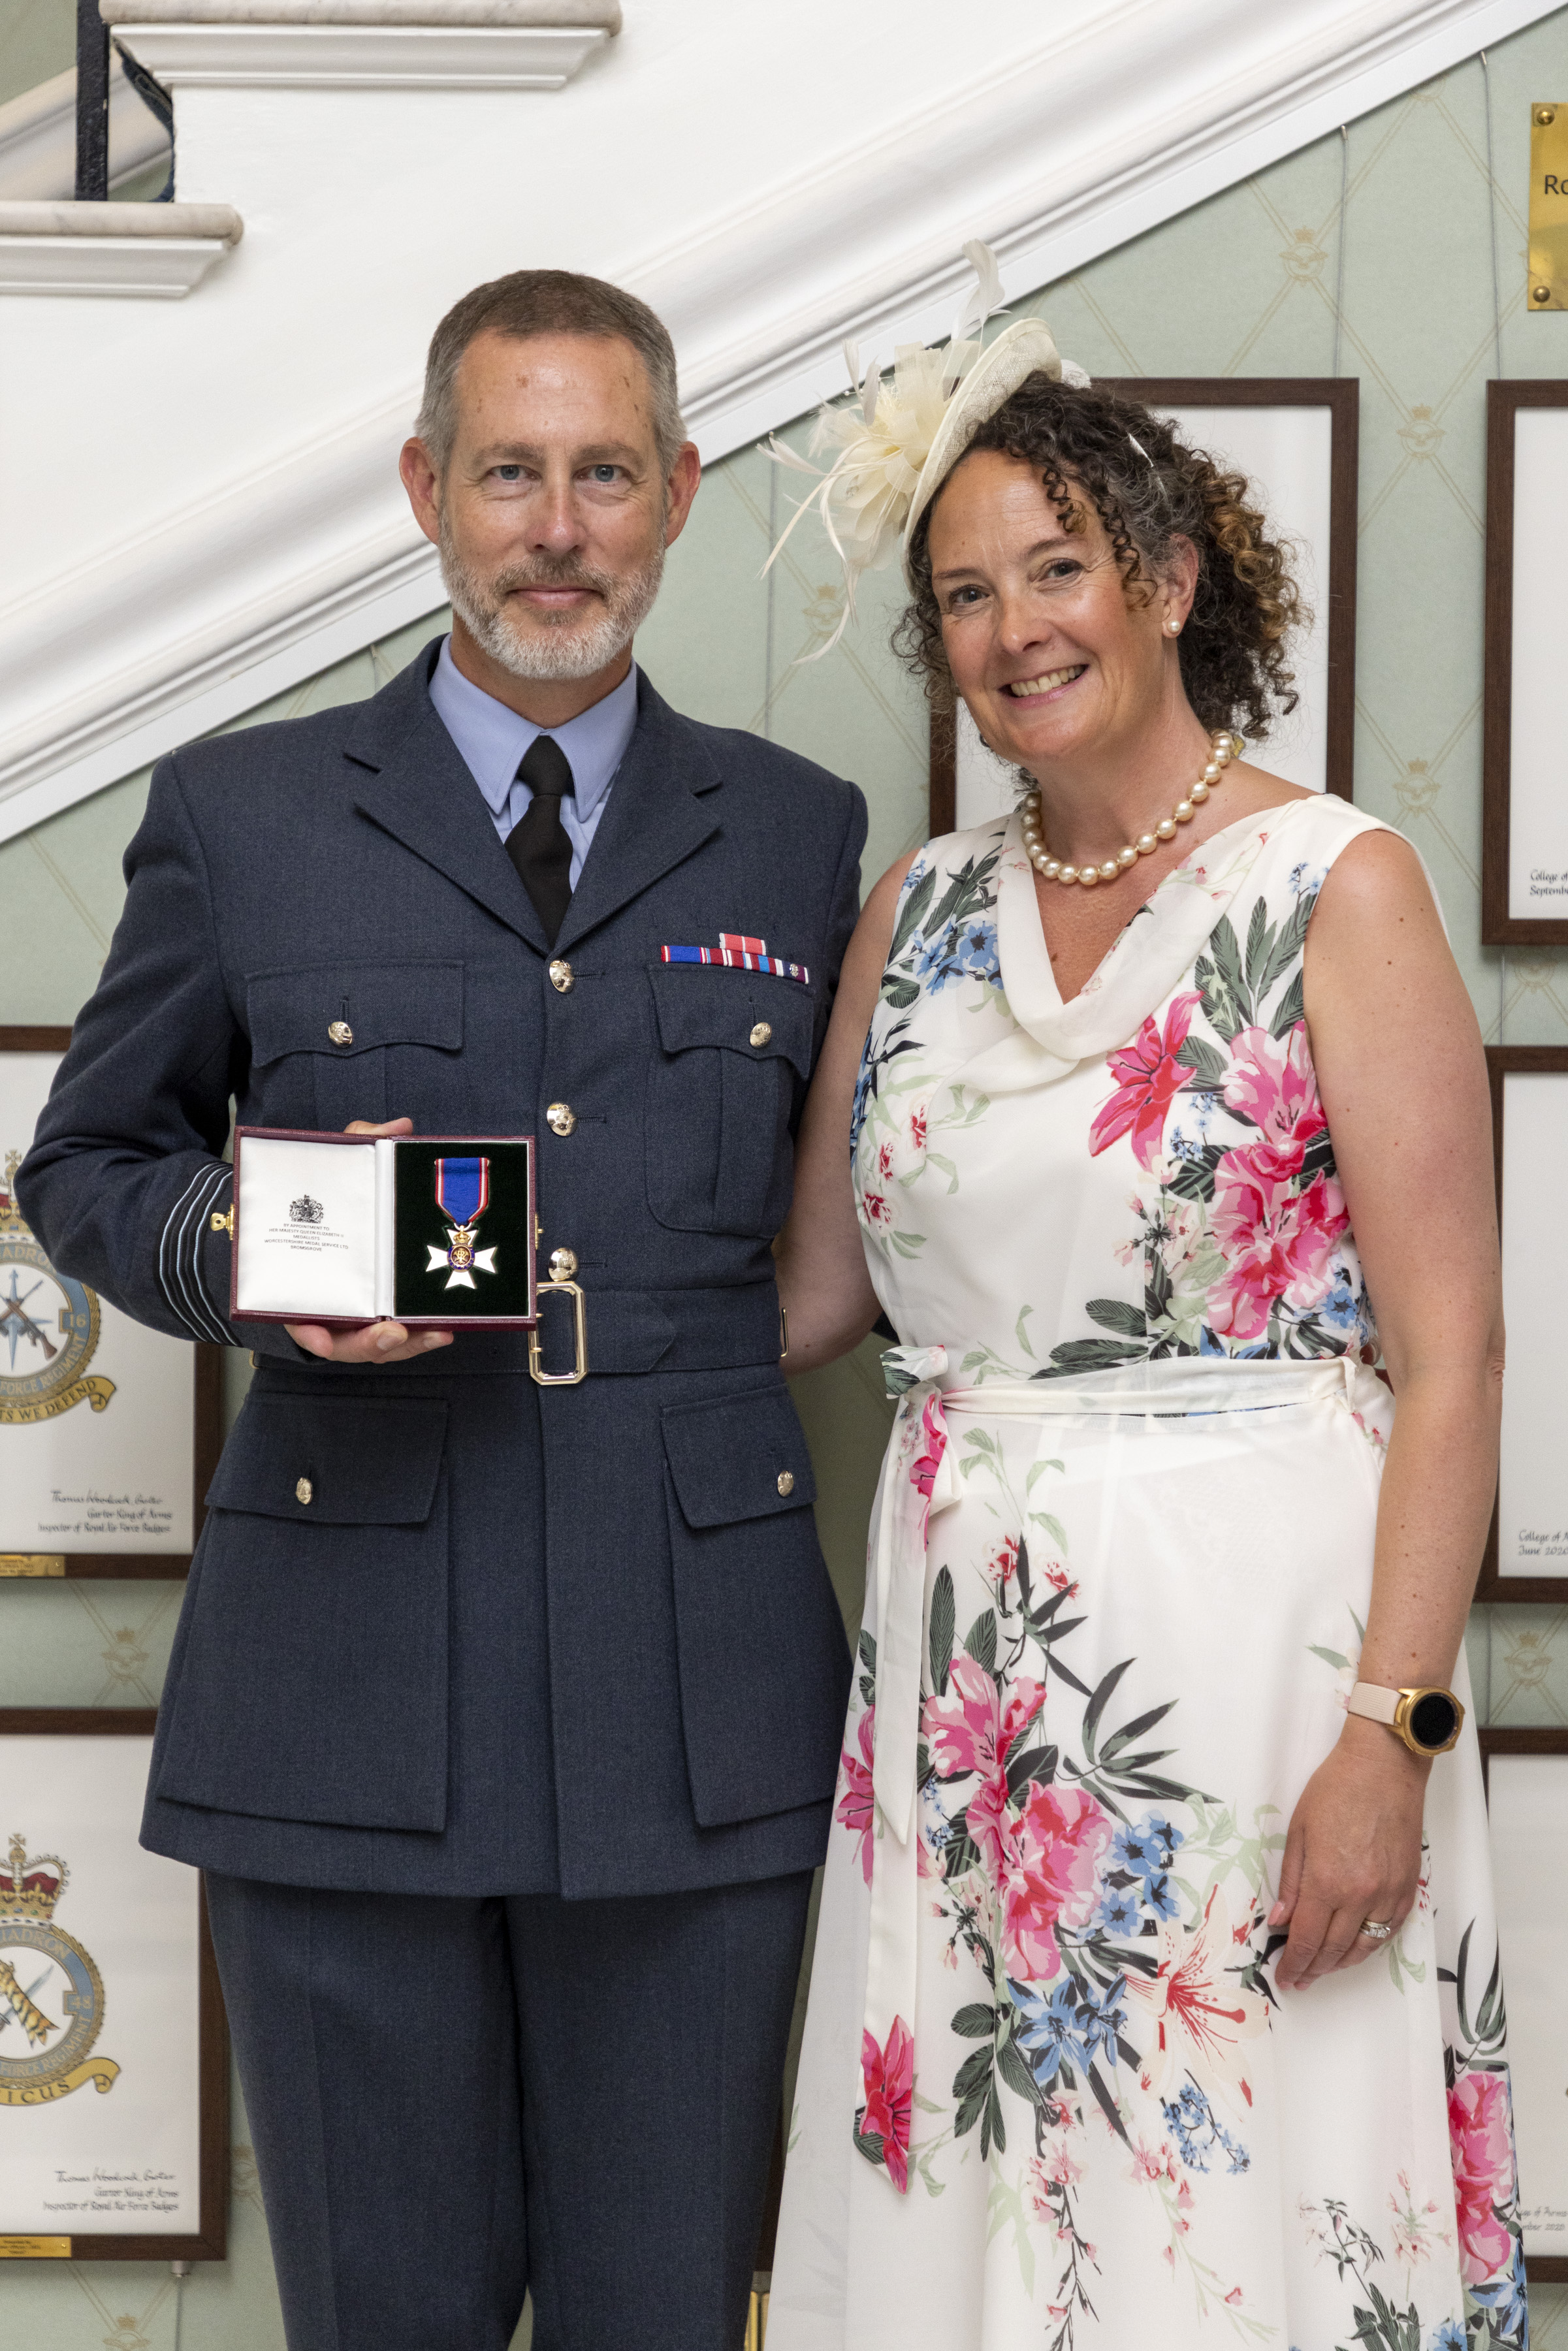 Wing Commander Piers Morrell with wife Gina picture at Buckingham Palace shortly after being presented with the MVO medal